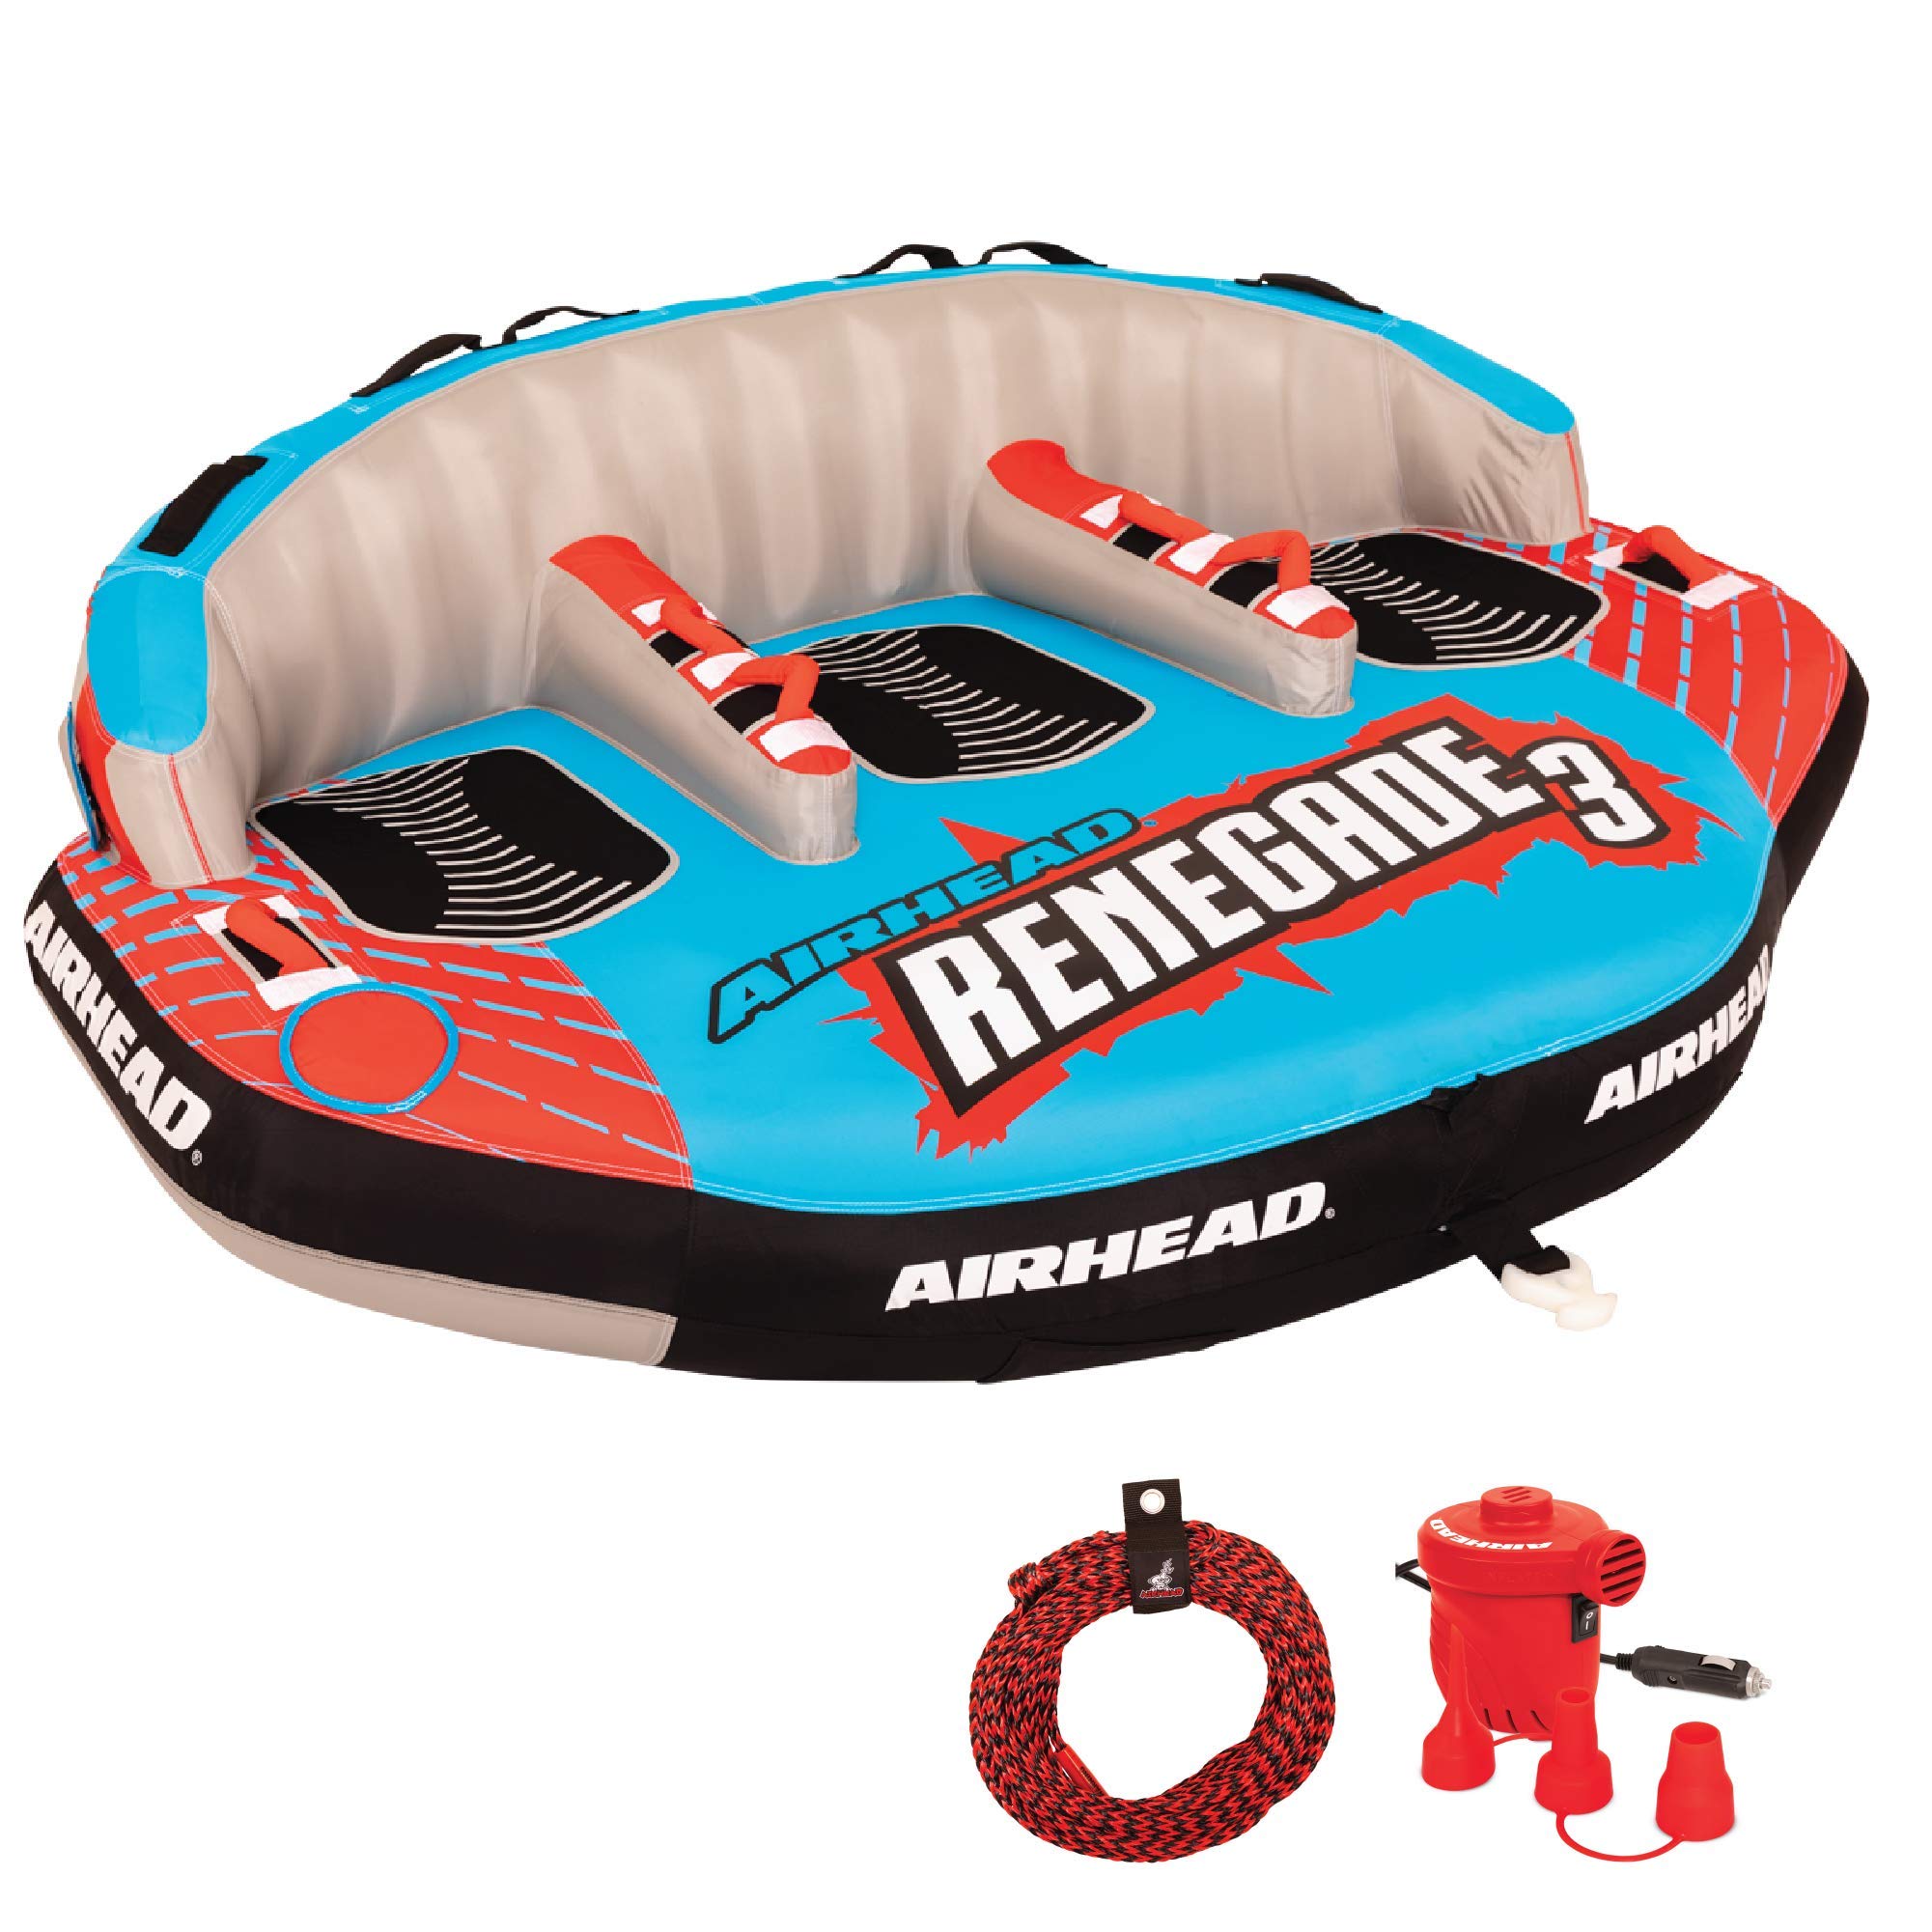 Airhead AHRE-503 Renegade Big 3 Person Inflatable Towable Water Tube Seat Rider Boating Tubing Kit with Boat Pull Rope and Pump for Kids and Adults